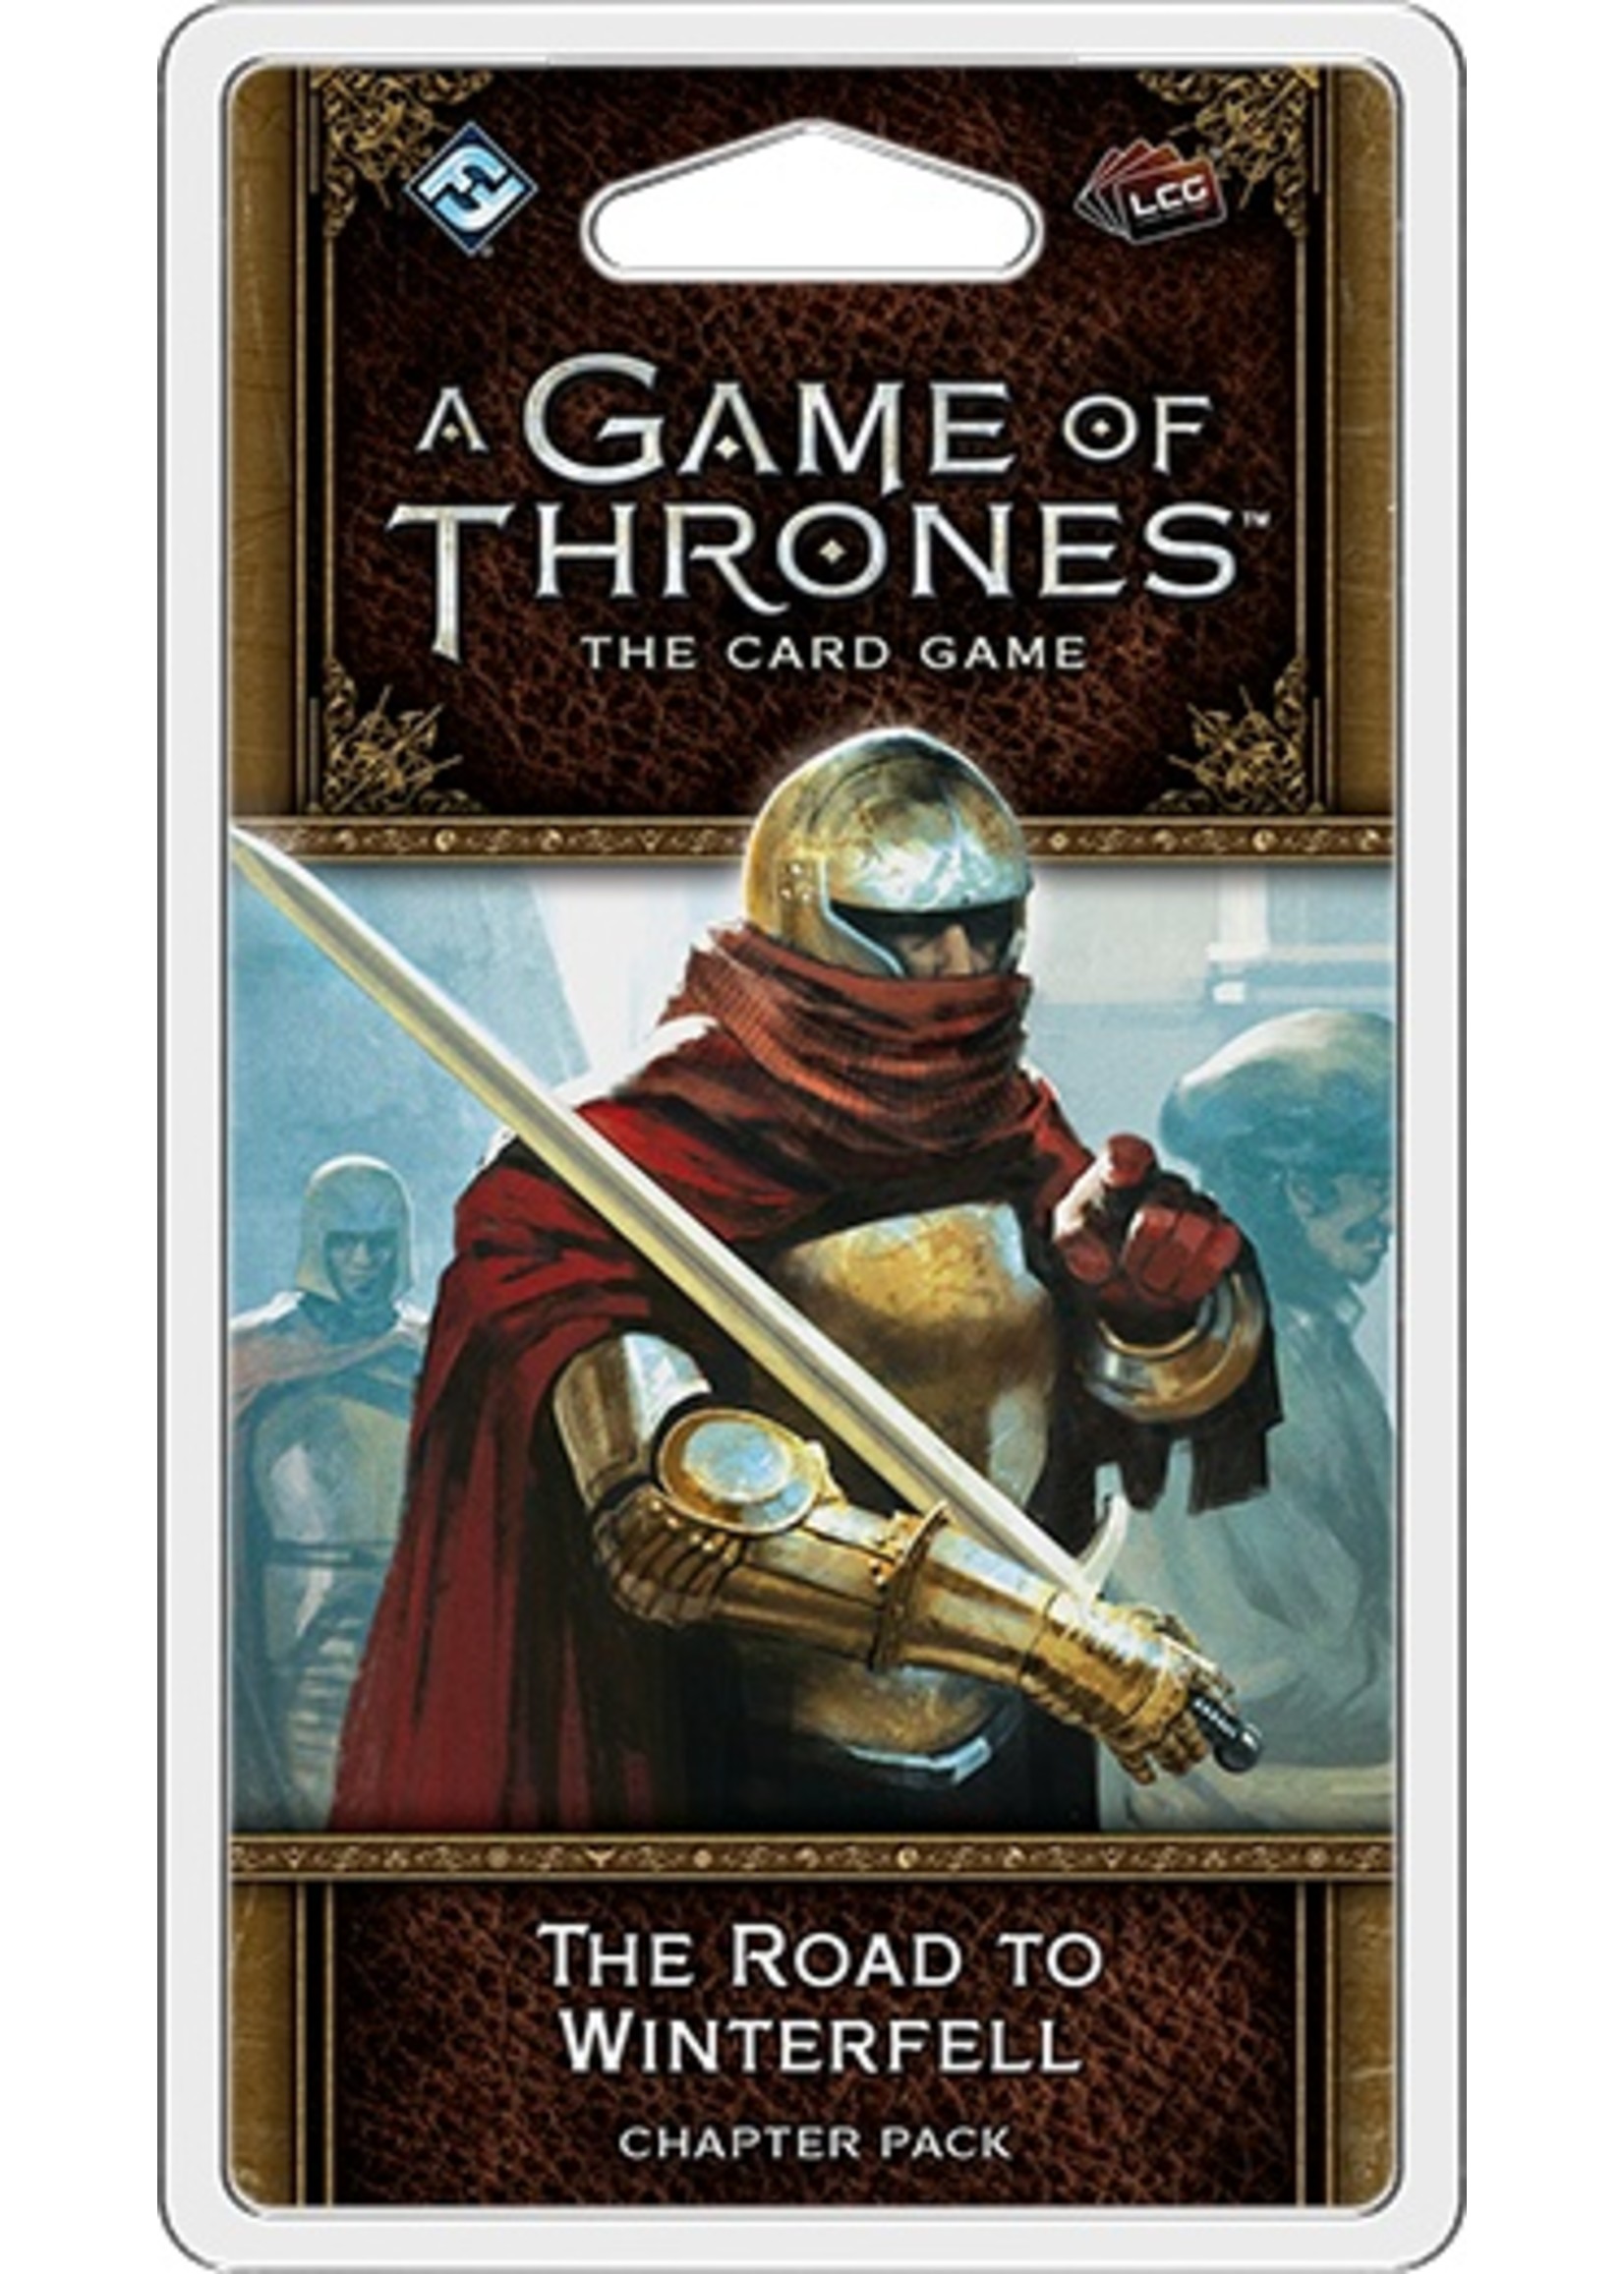 Fantasy Flight A Game of Thrones: The Card Game (Second Edition) - The Road to Winterfell